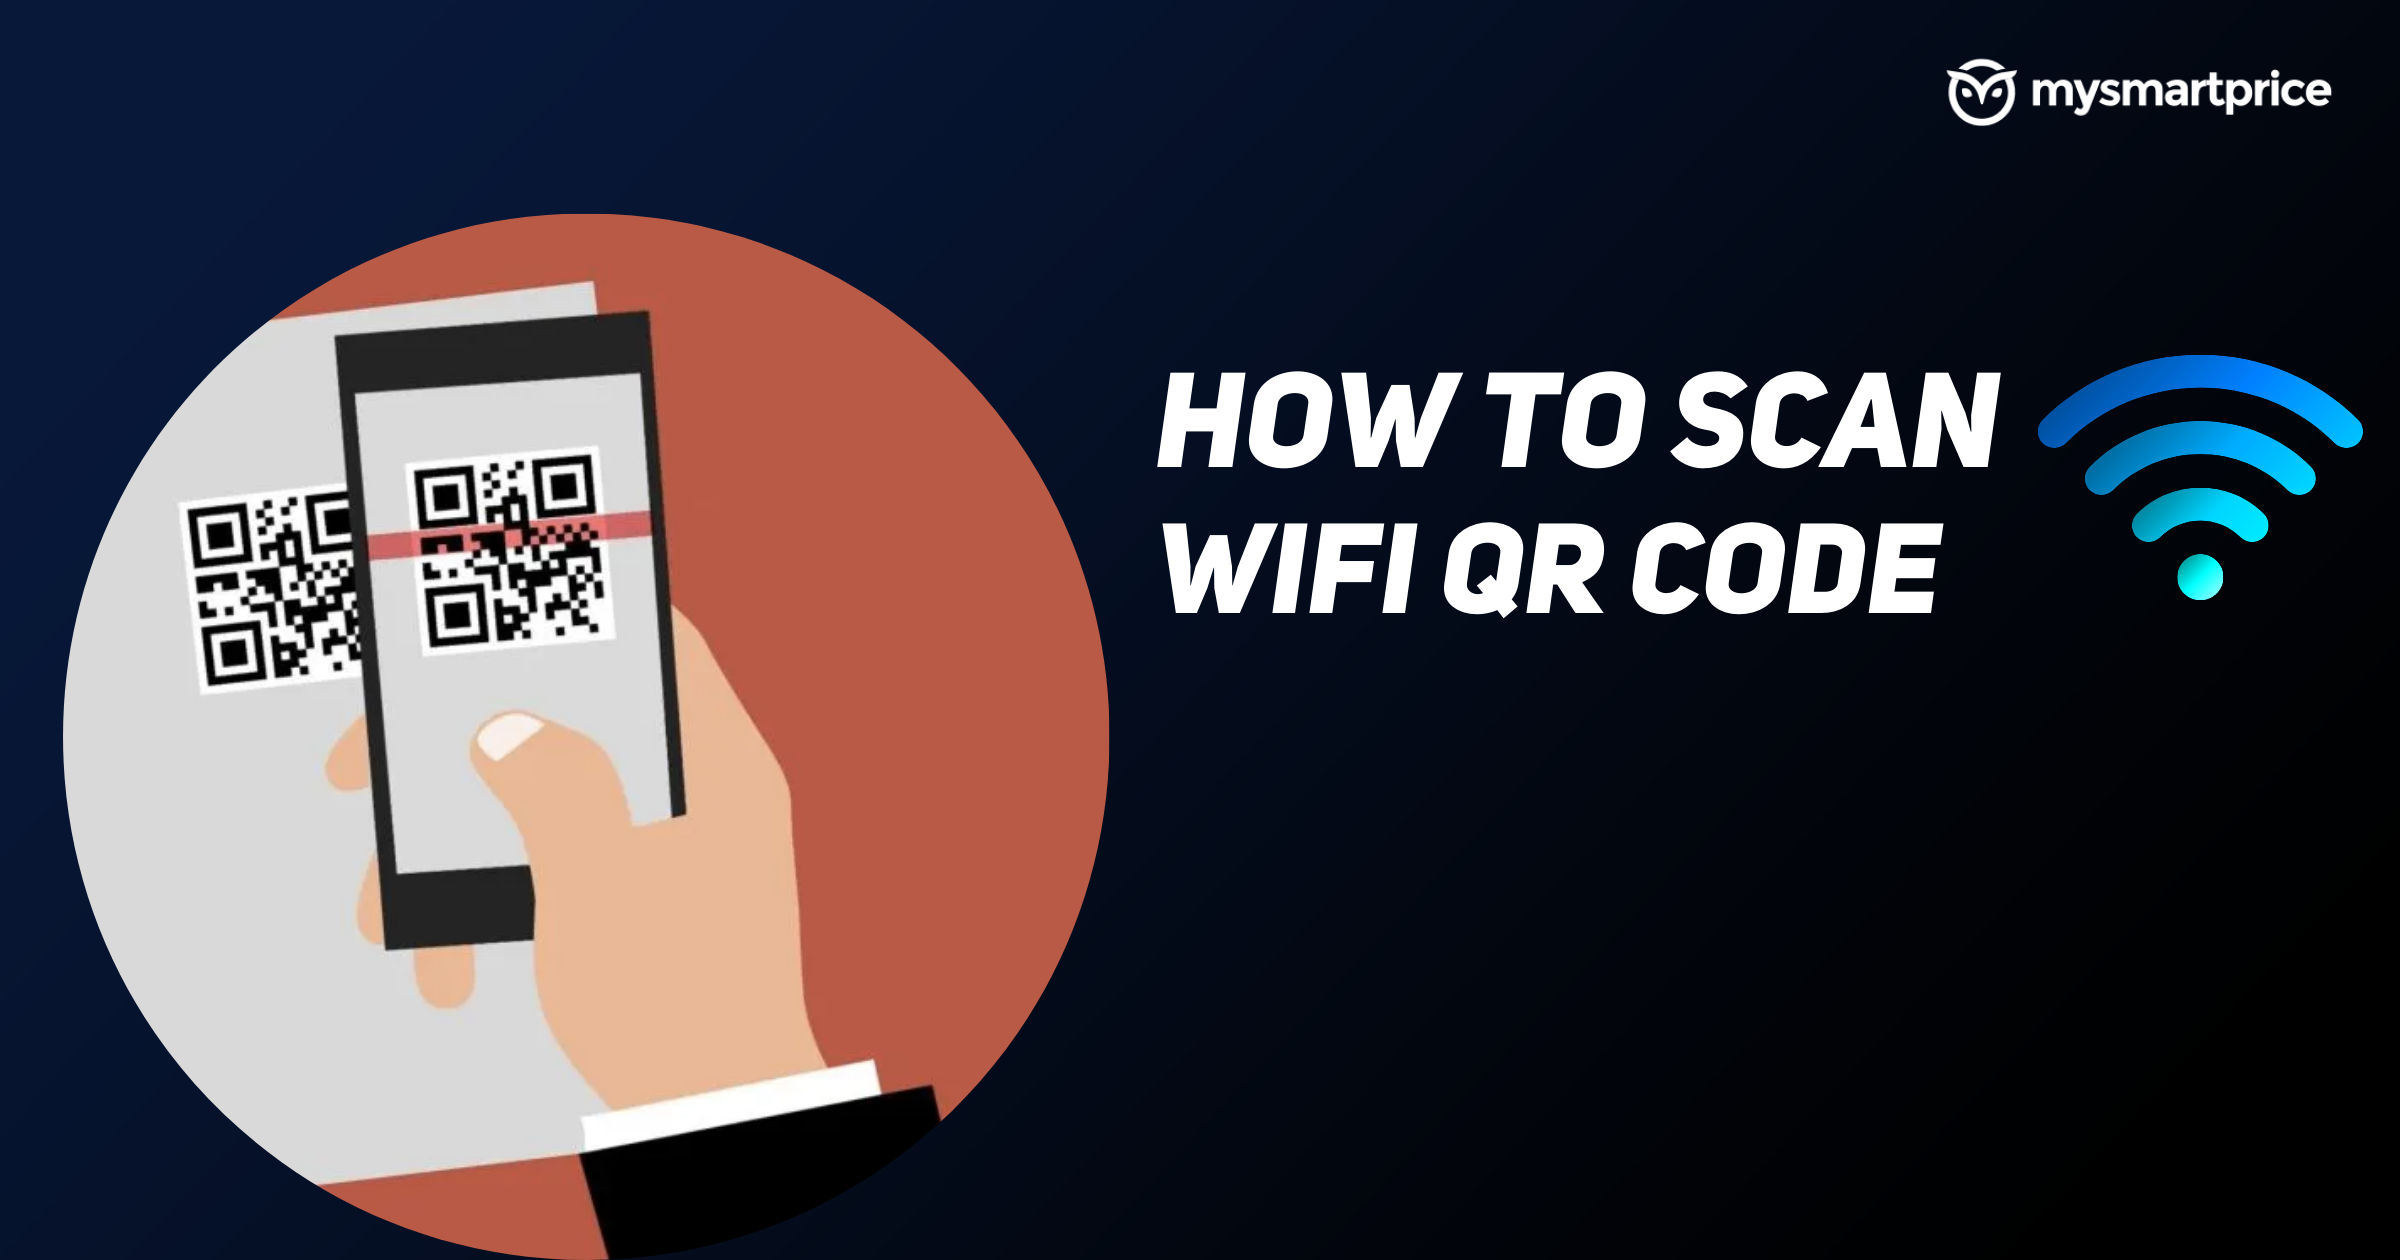 How To Scan Wifi Qr Code On Android And Iphone - Mysmartprice